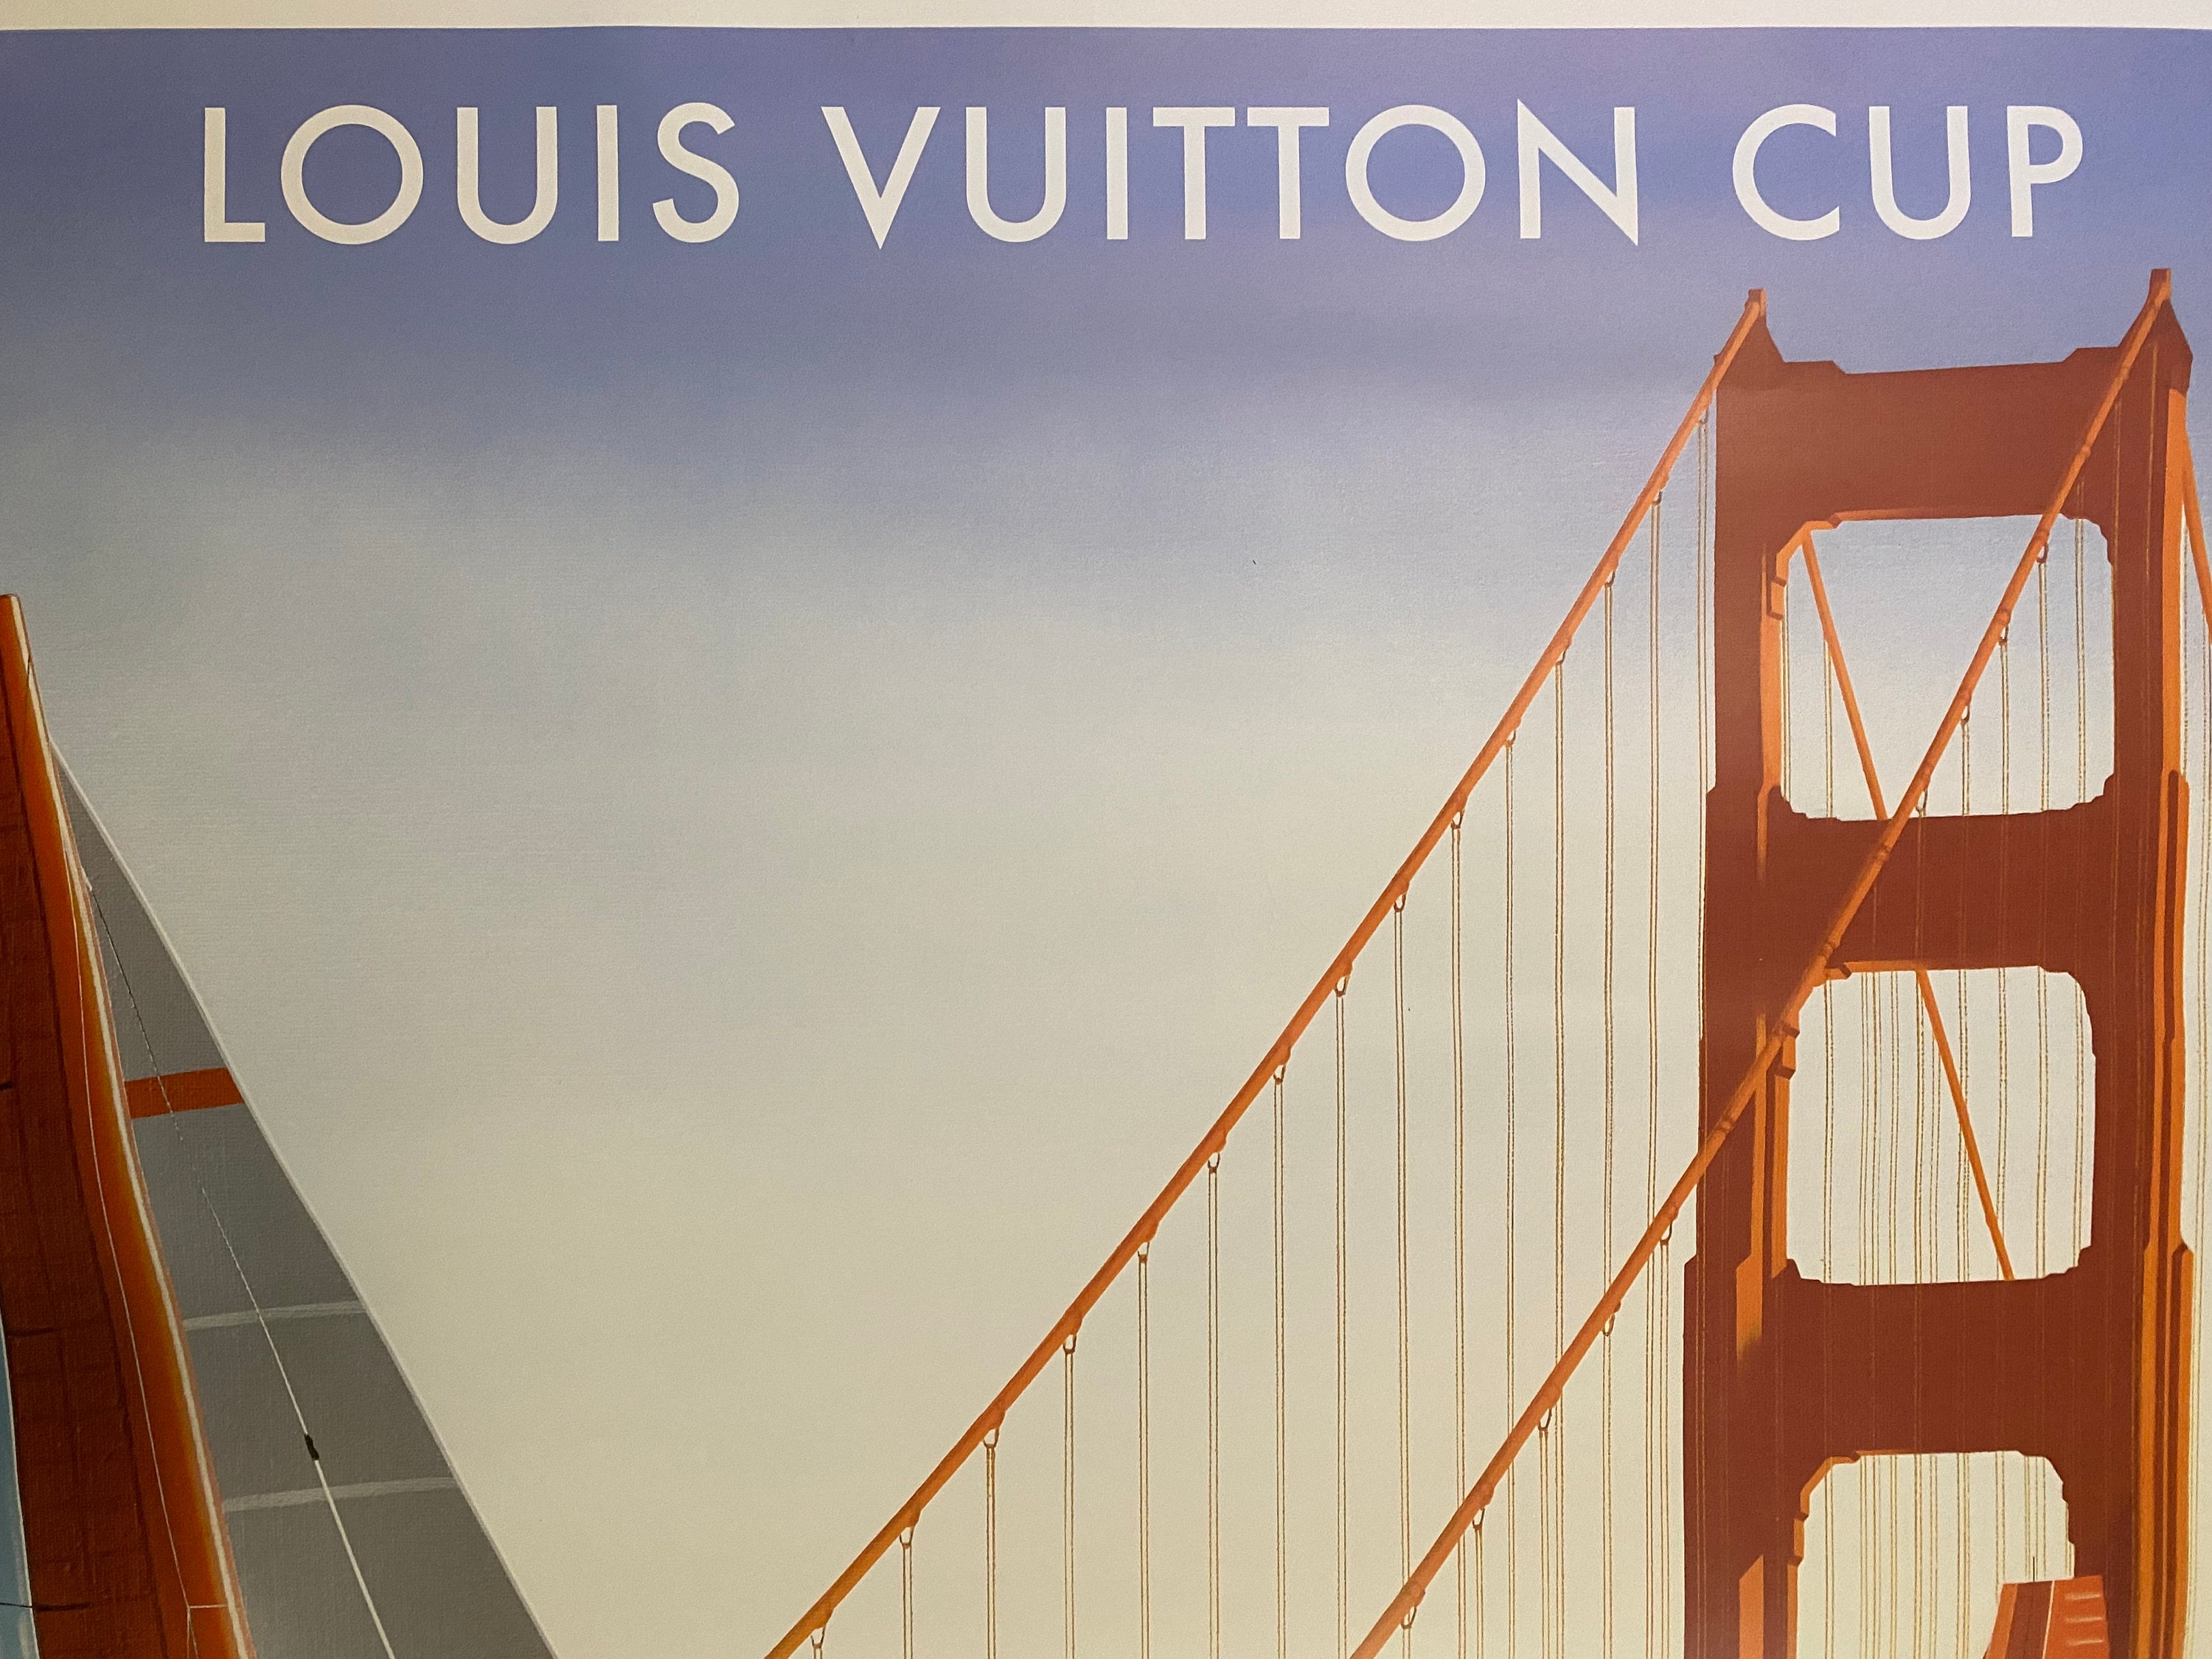 Poster by Razzia for the Louis Vuitton cup, New Zealand